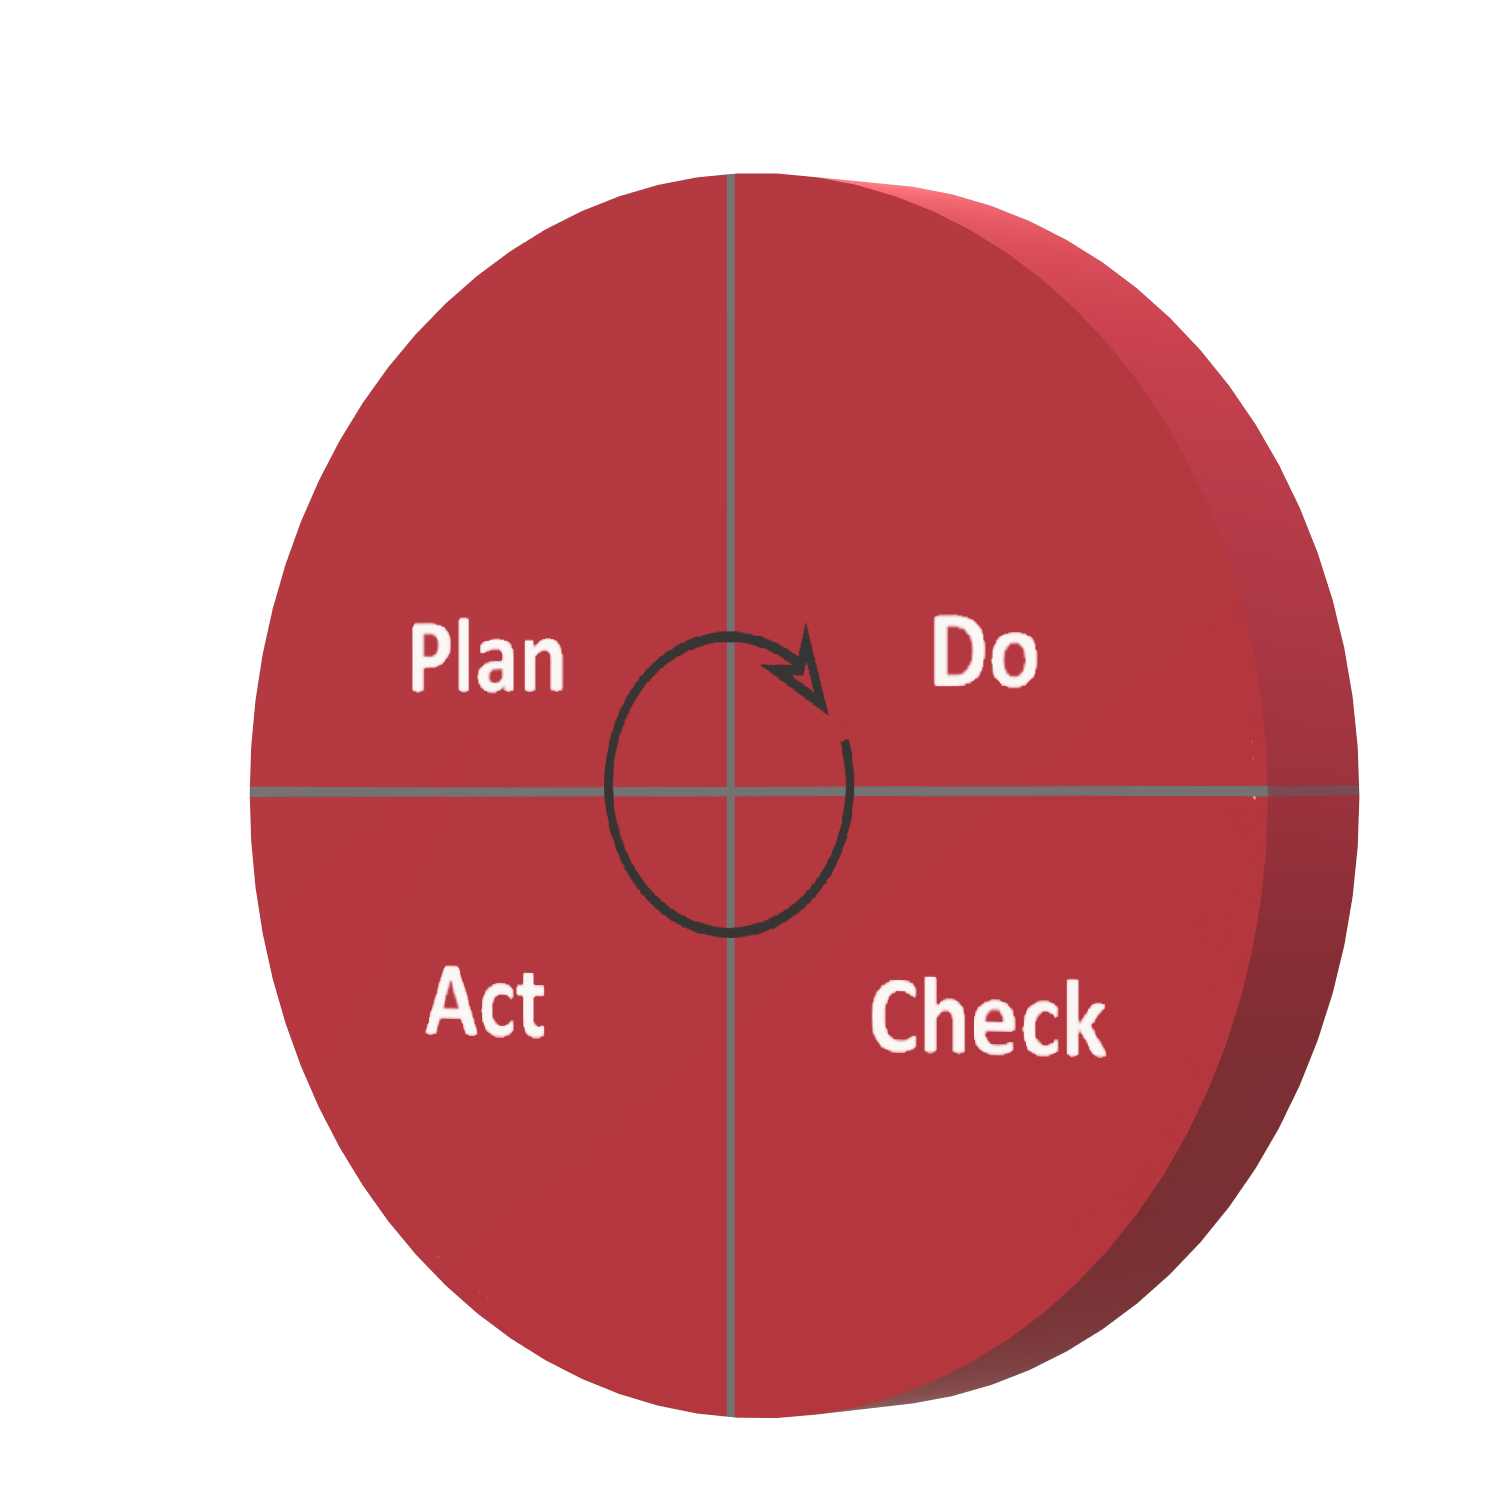 Illustration of the "Deming Cycle" for project controlling - Plan, Do, Check, Act.